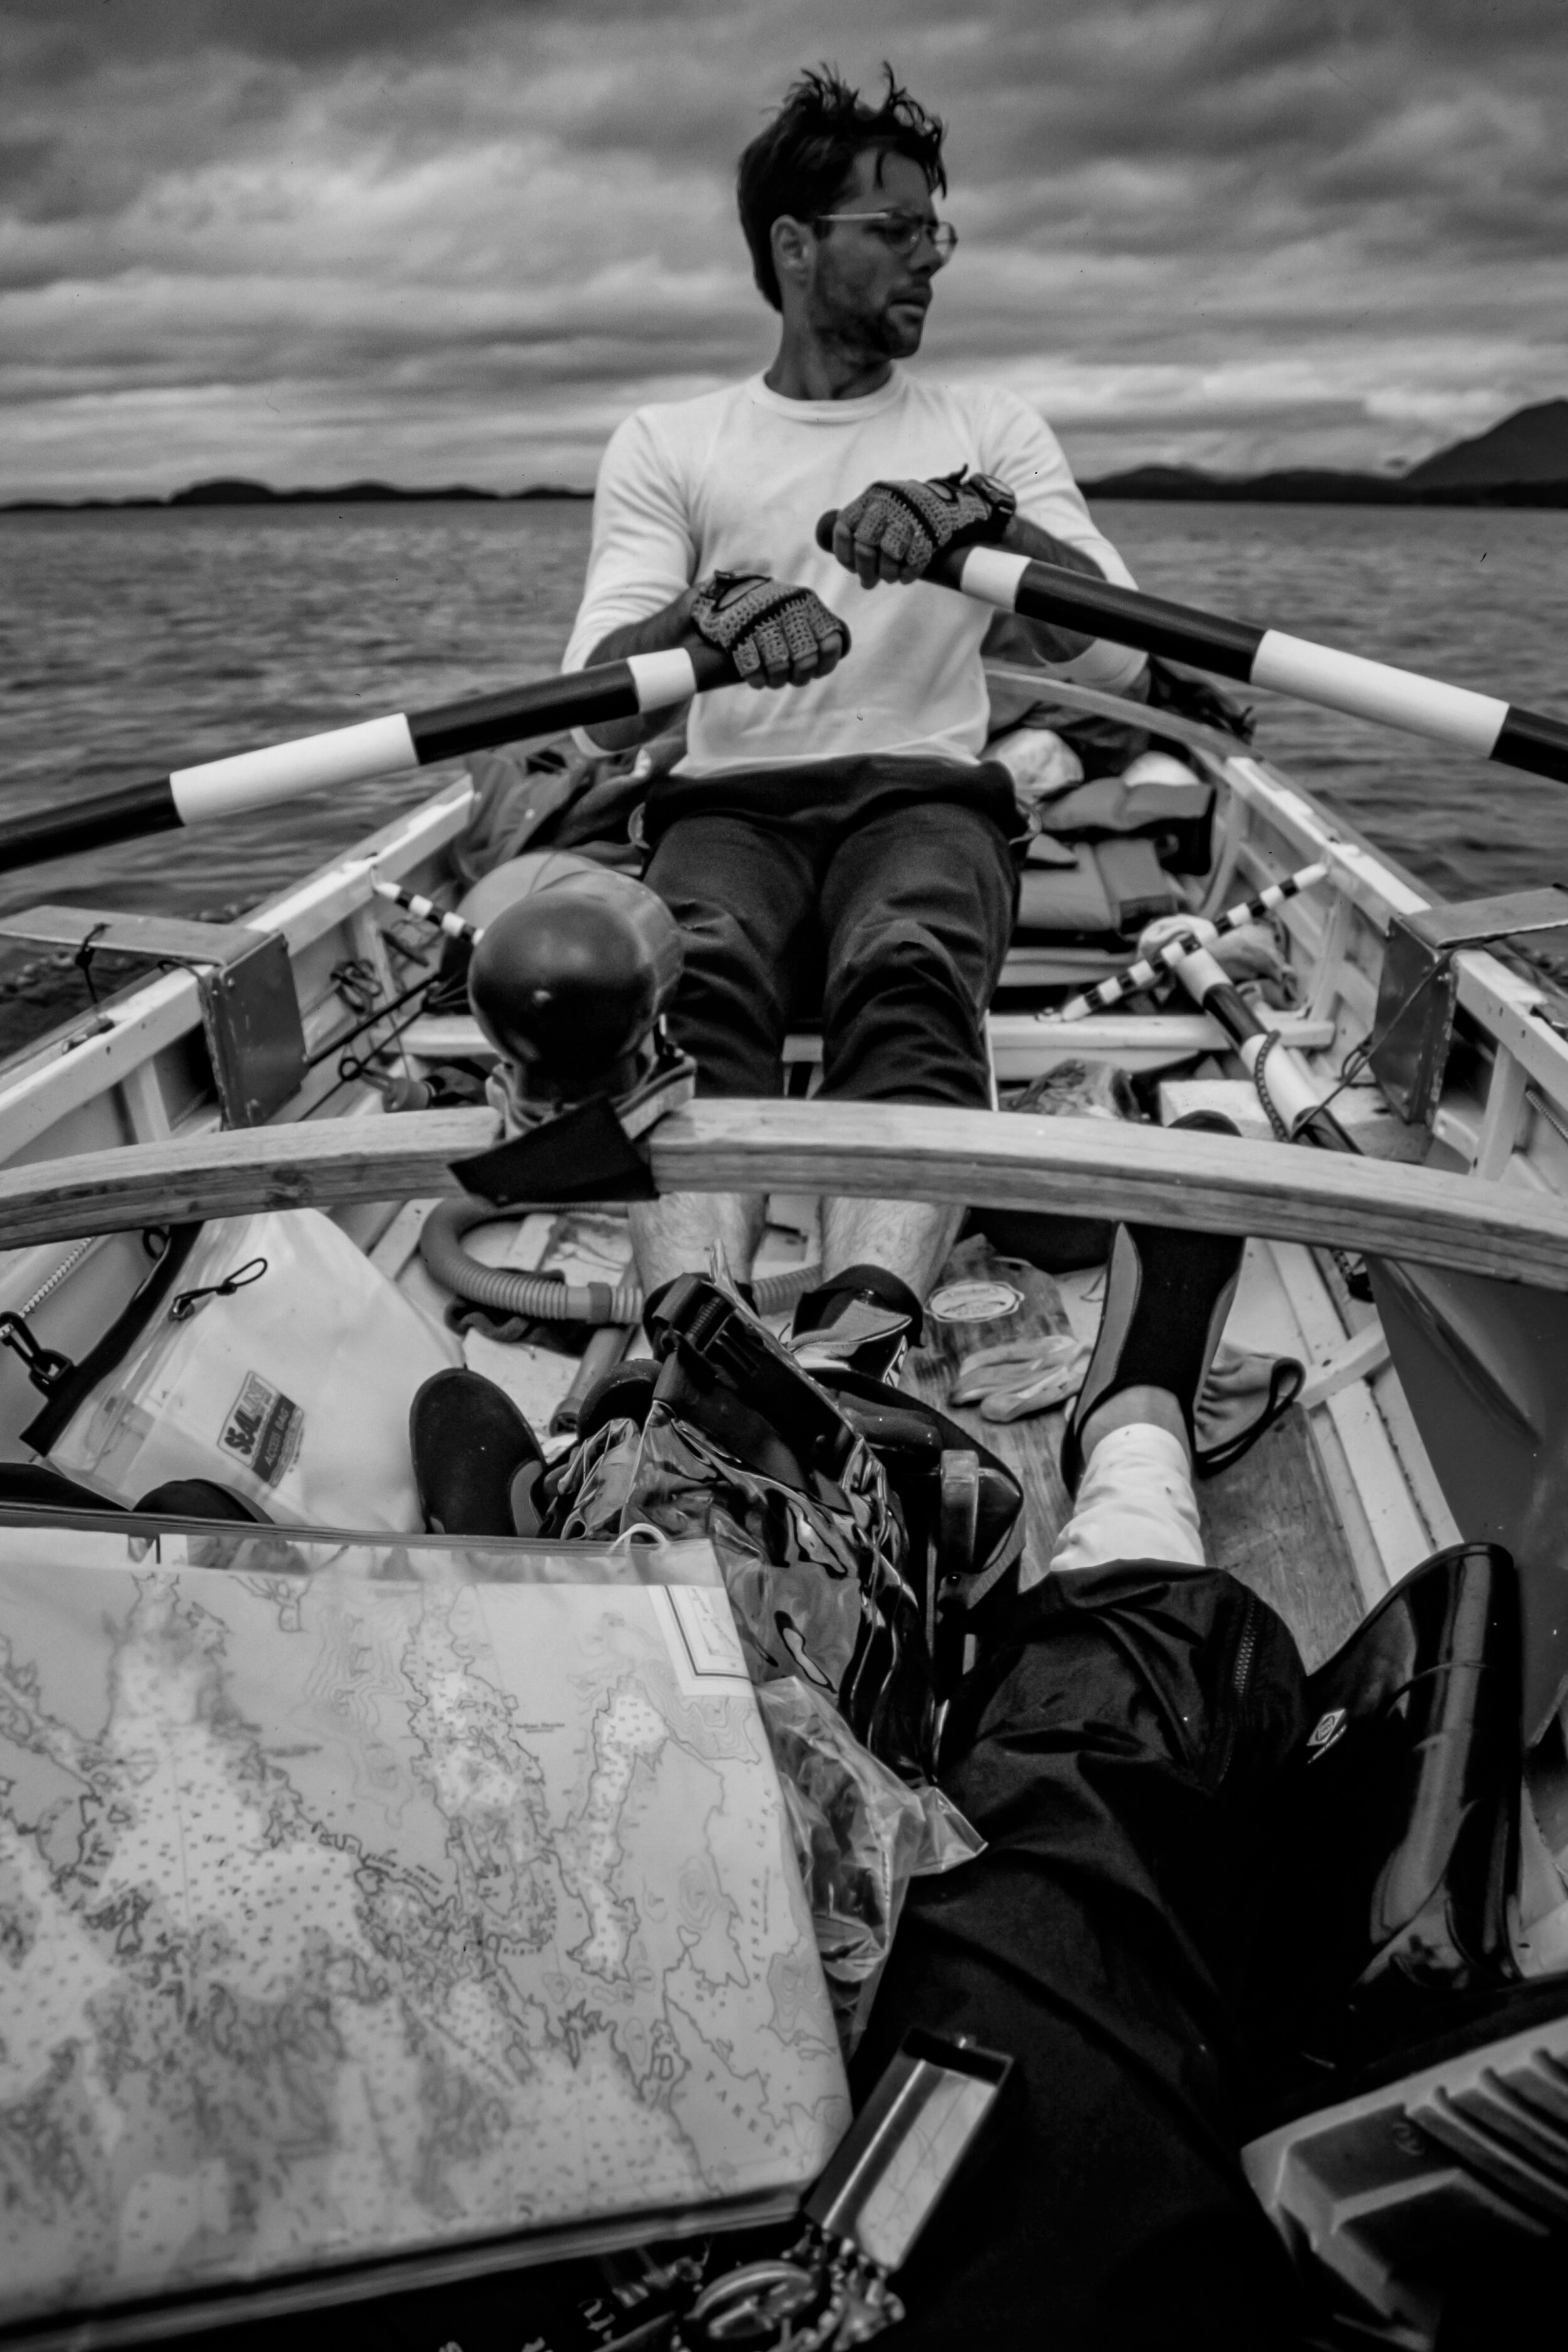  He is the viewpoint of the navigator seated atop gear in the stern of the boat. There is in no seat for anyone besides the rower.  